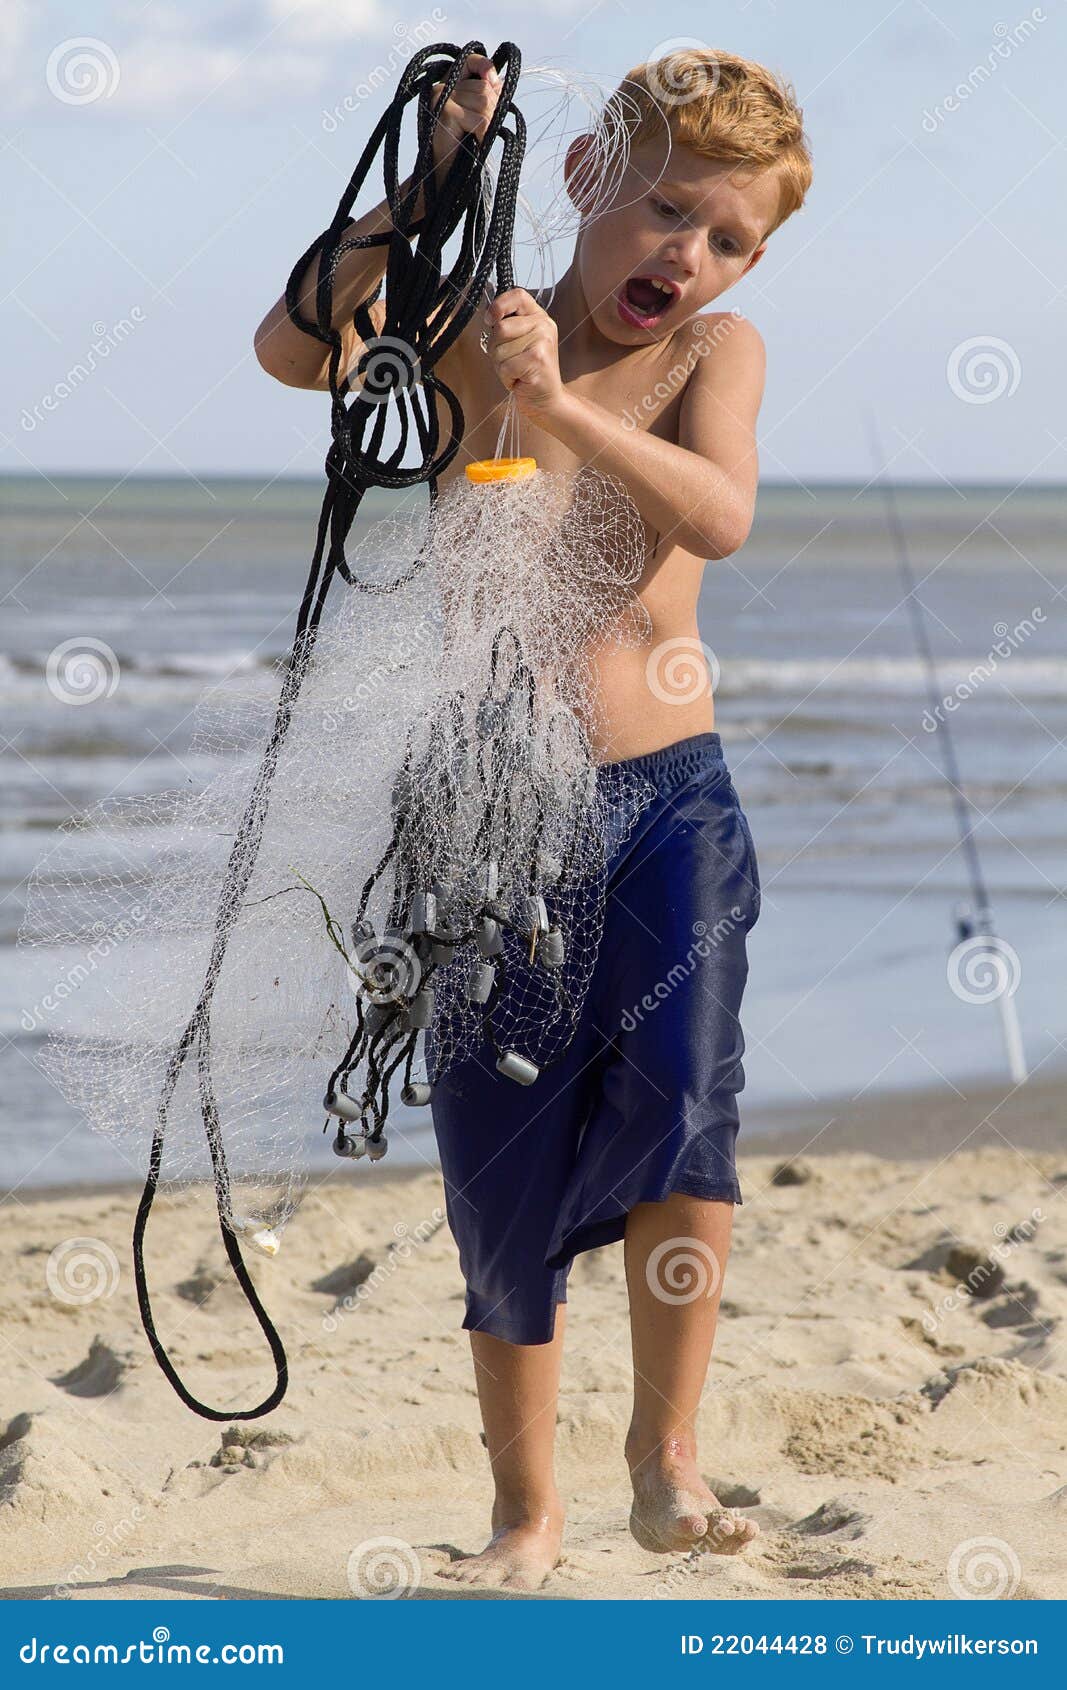 Boy Net Fishing stock photo. Image of carry, ocean, excited - 22044428